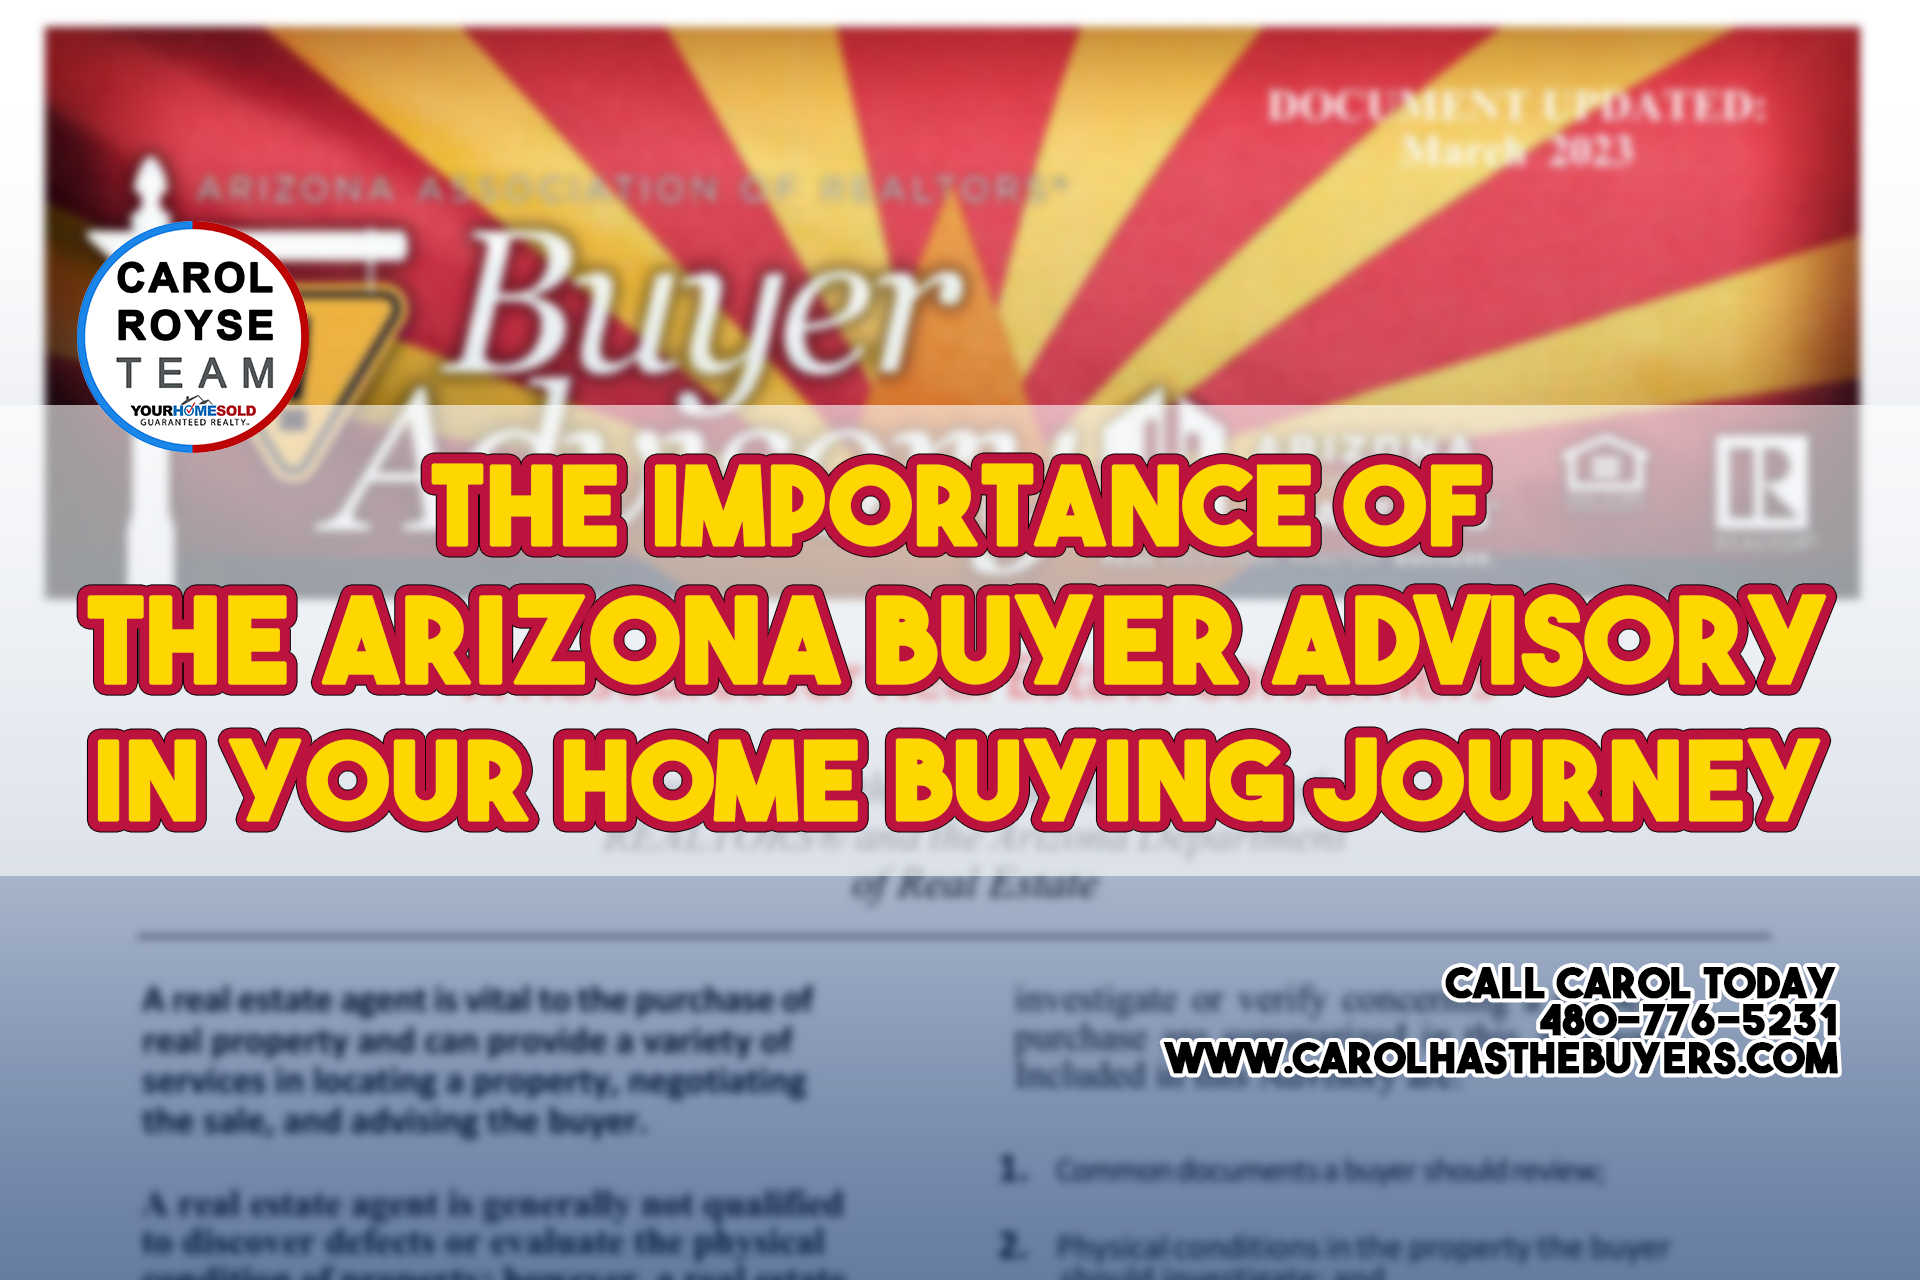 The Importance of the Arizona Buyer Advisory in Your Home Buying Journey